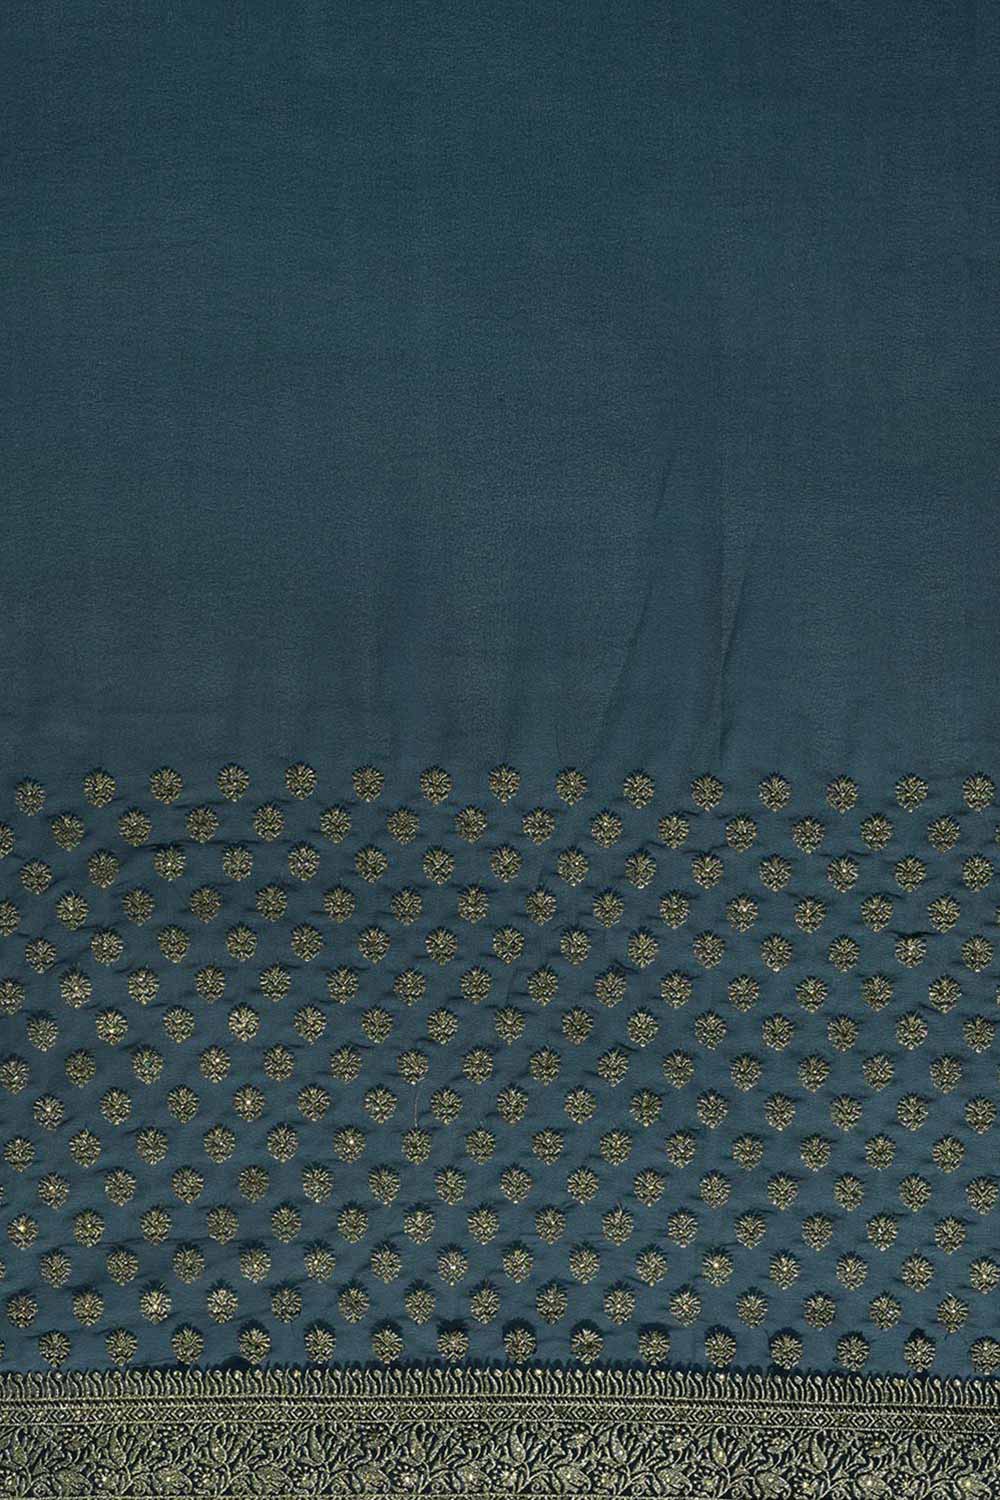 Buy Georgette Embroidered Saree in Blue Online - Zoom Out